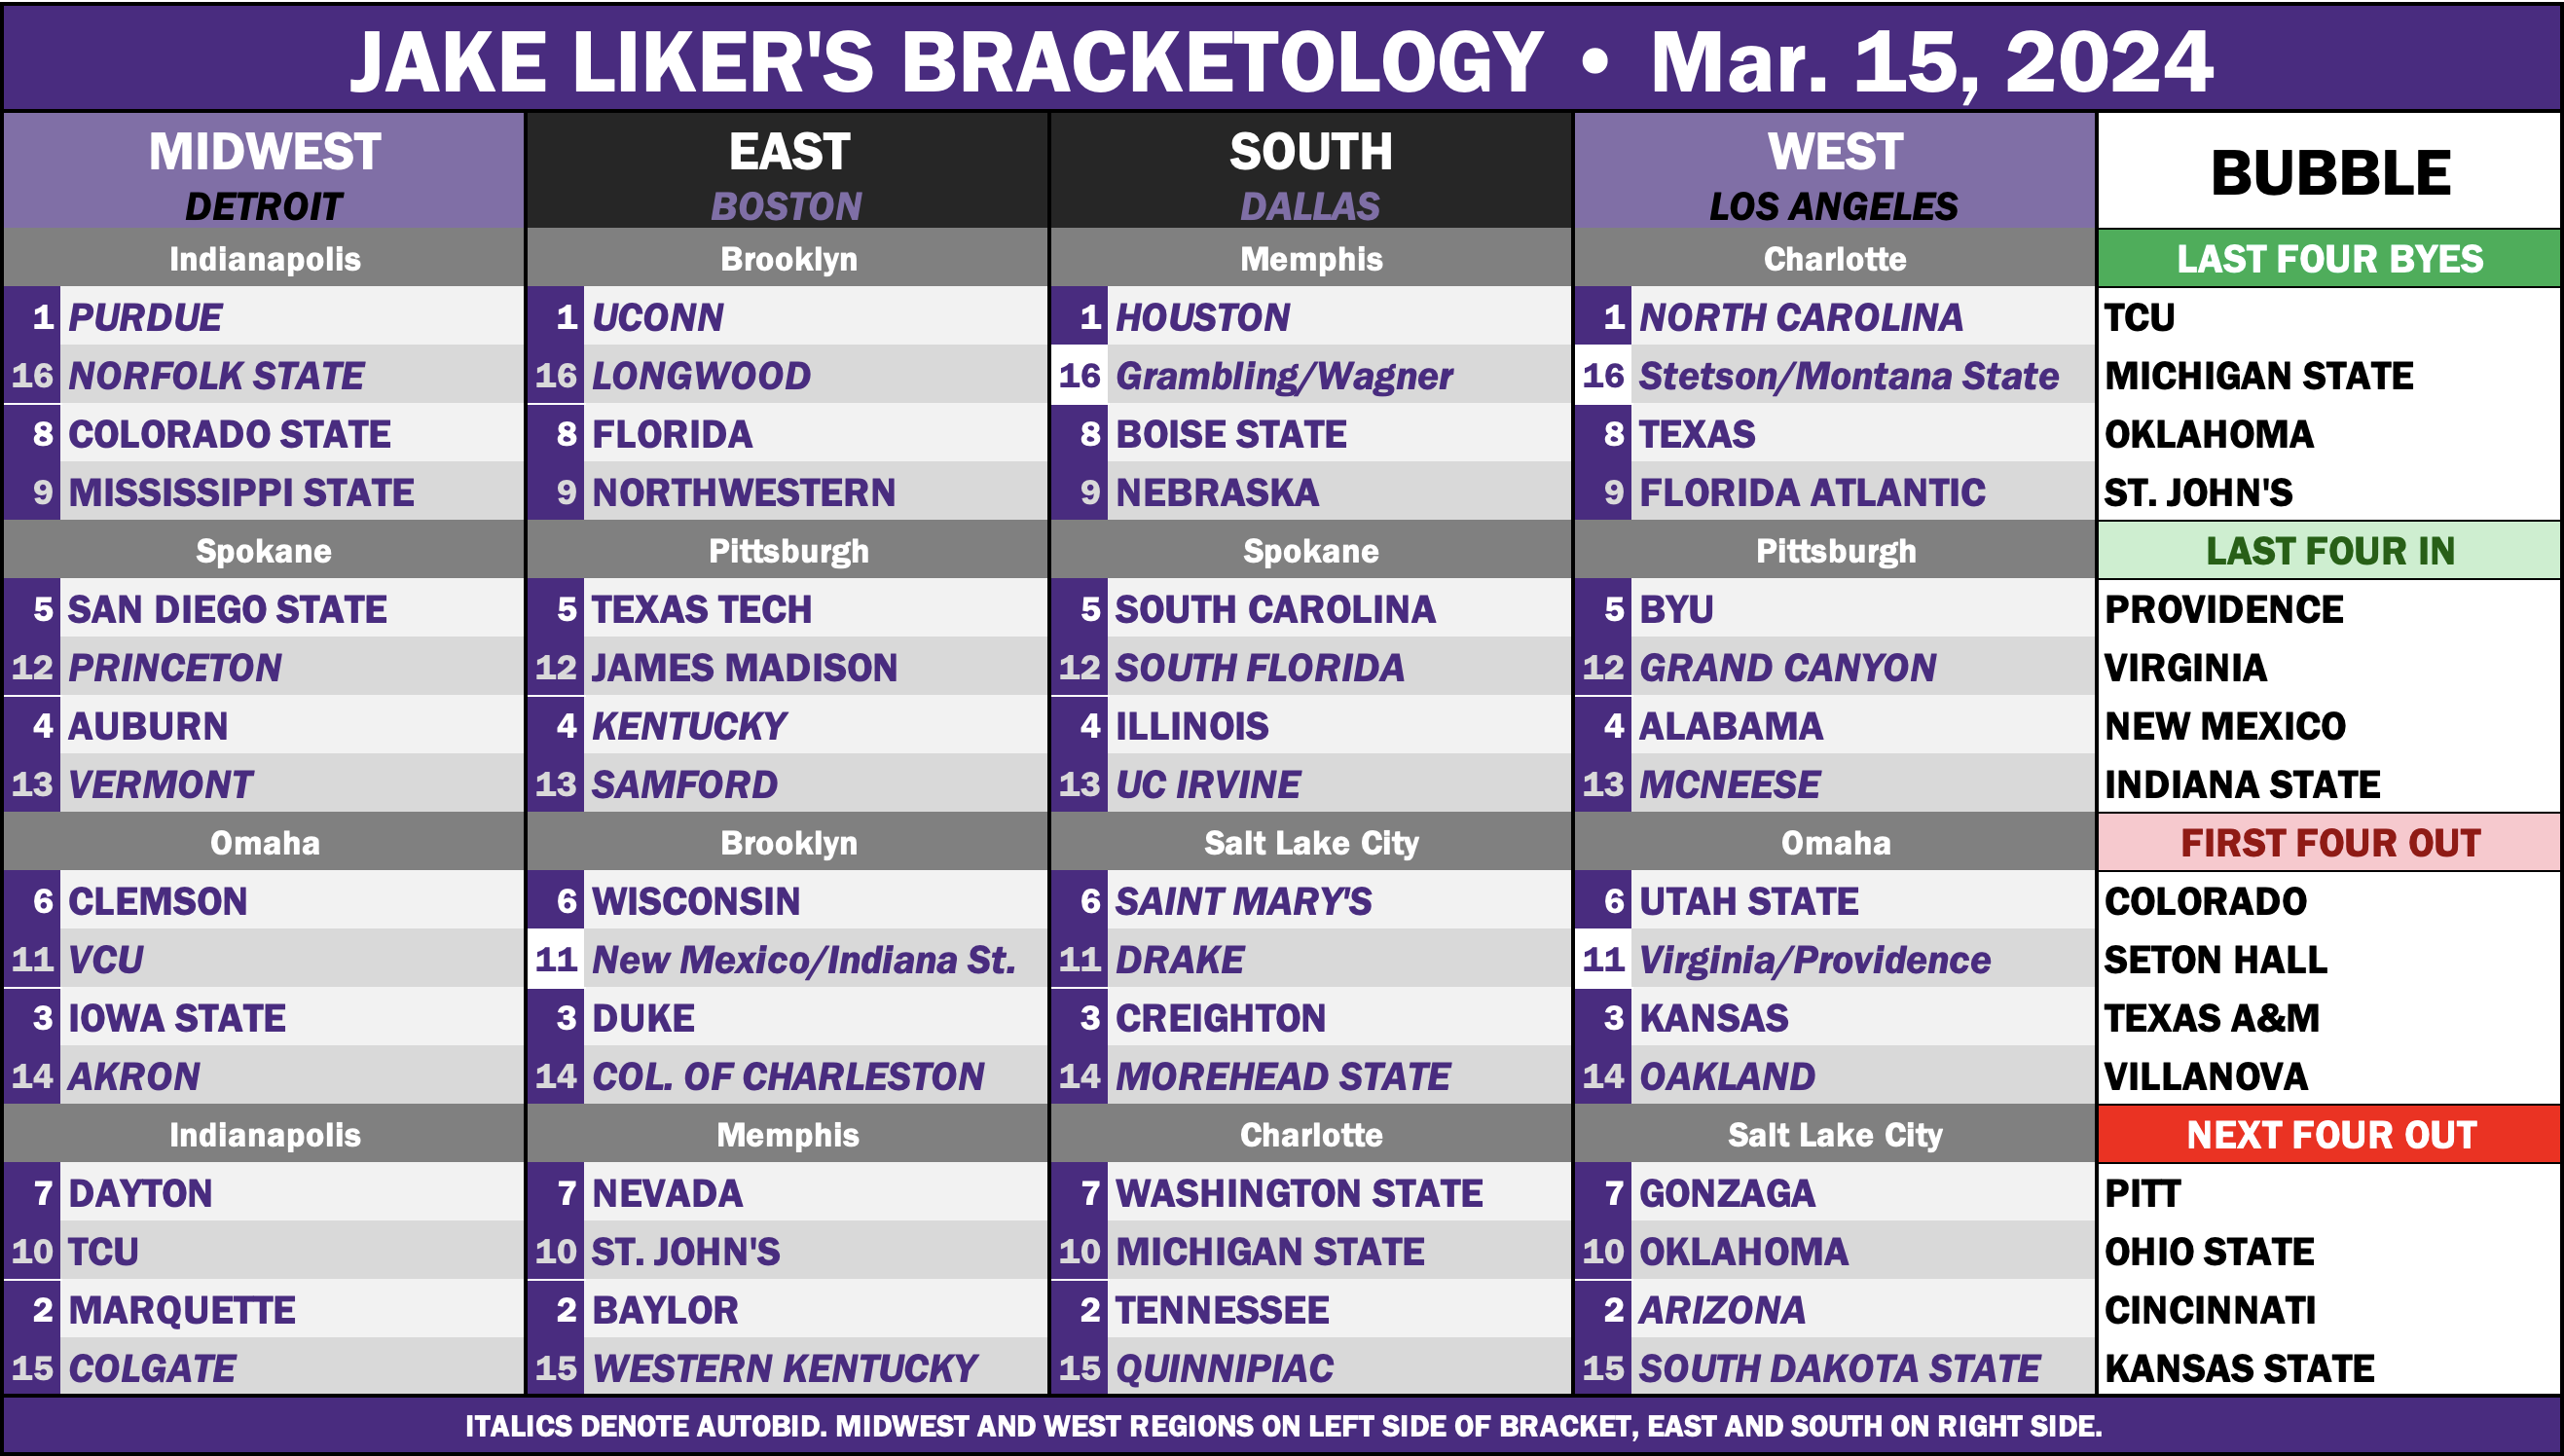 Bracketology projections graphic for 3/15/24.